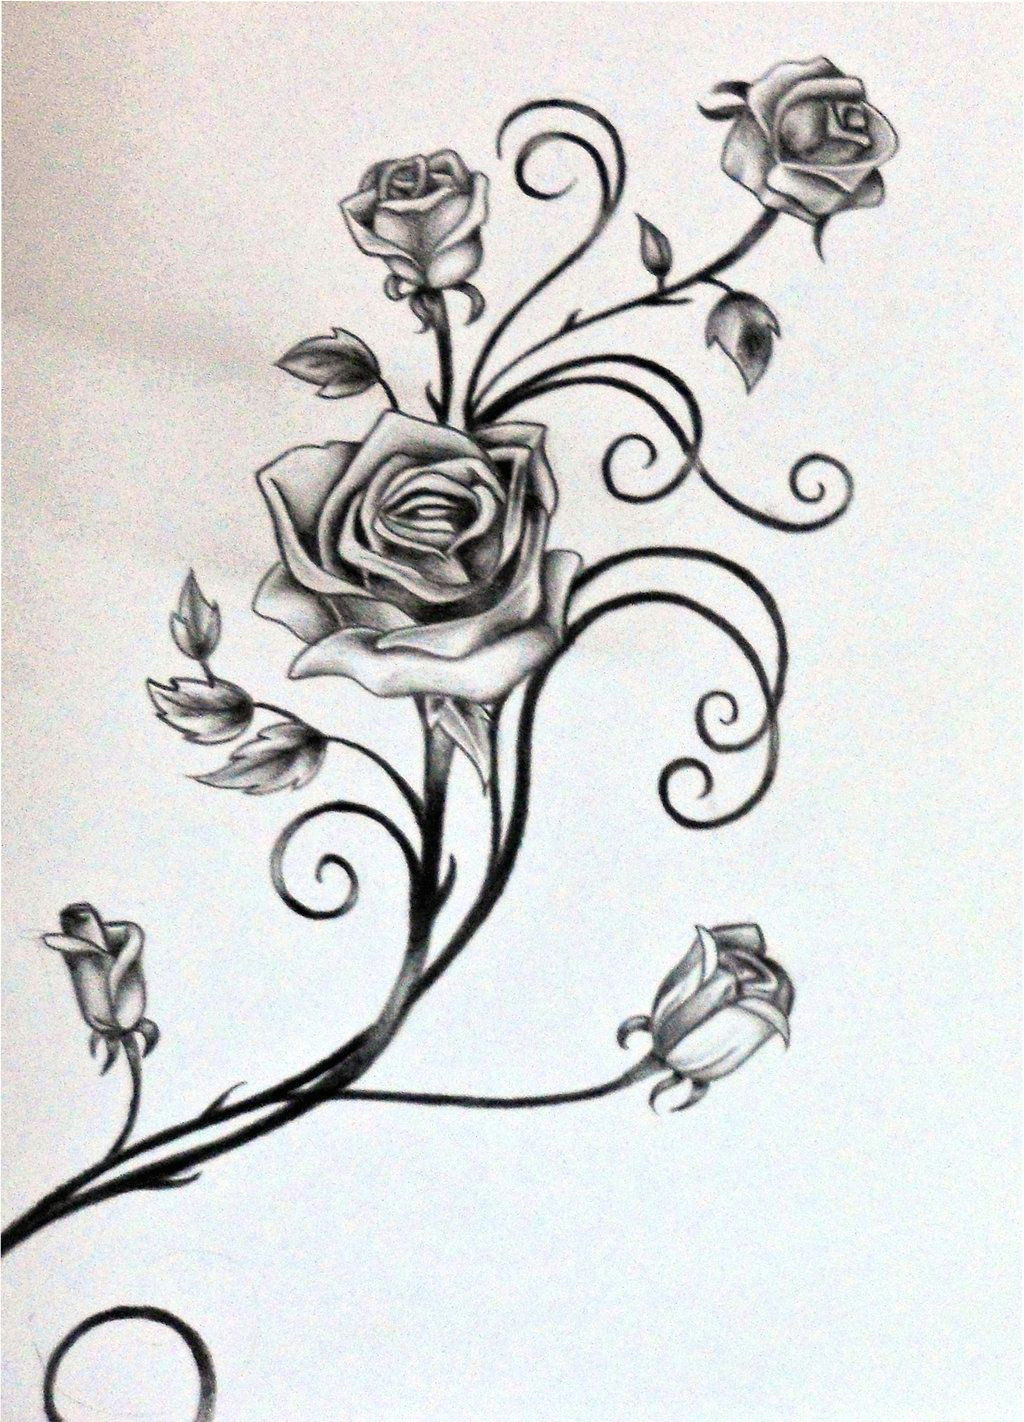 Drawings Of Tribal Flowers Drawings Of Vines and Leaves Roses and the Vine by Rosilutfi